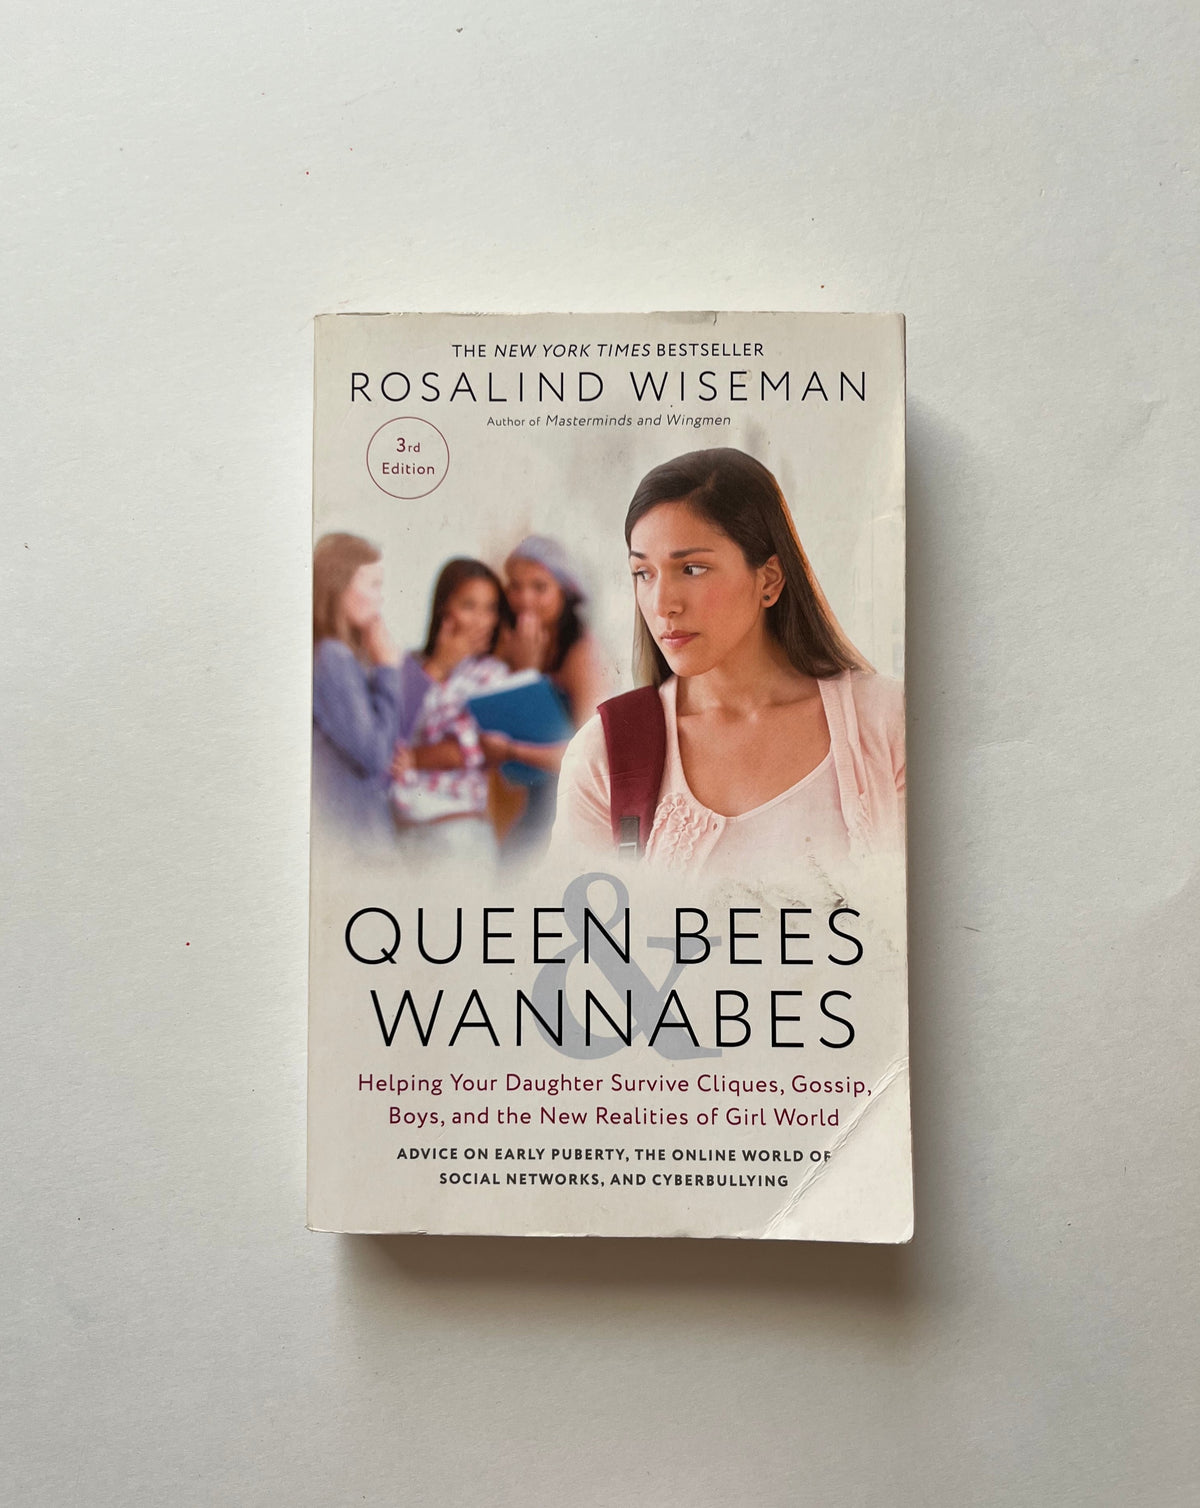 DONATE: Queen Bees and Wannabes by Rosalind Wiseman